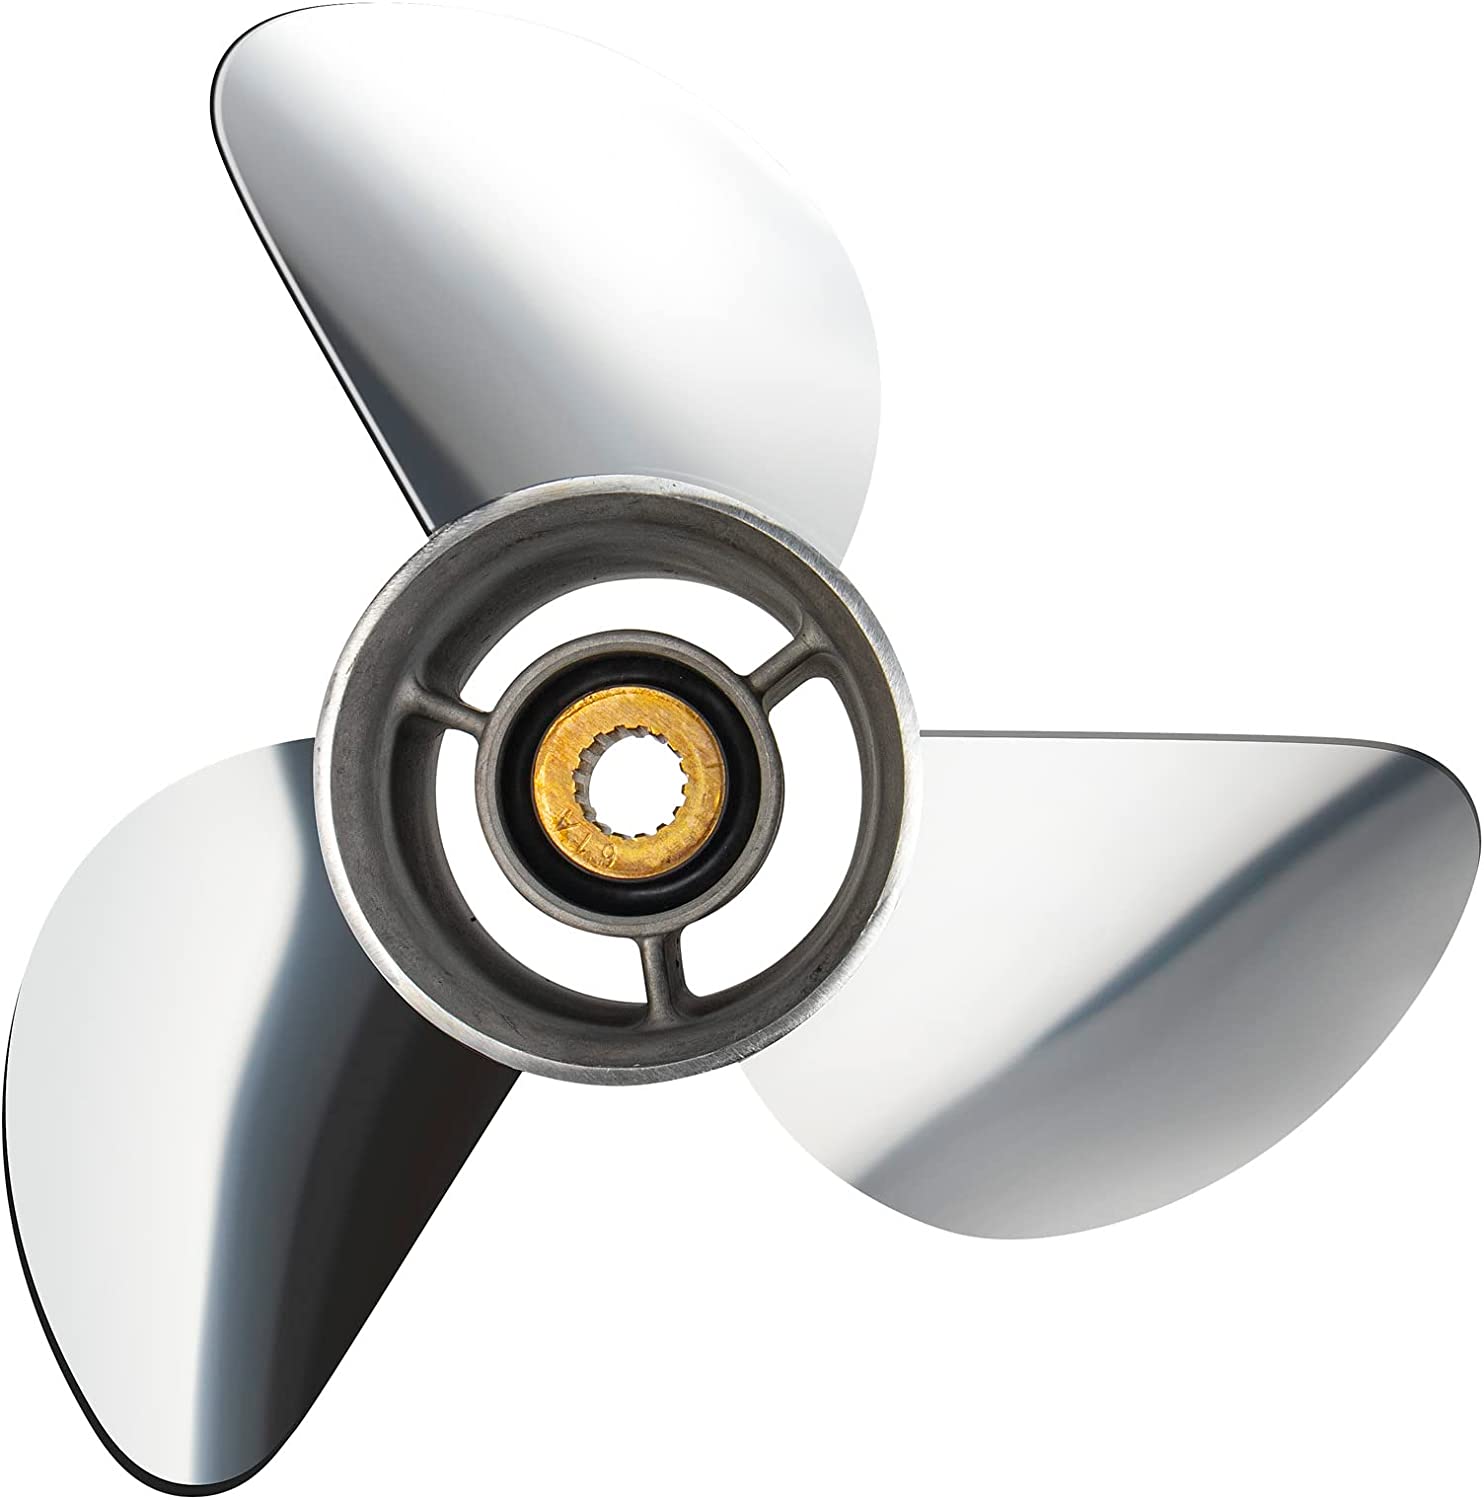 Stainless Steel Propeller for Yamaha Outboard Motos 150-250 HP, 15 Spline Tooth, RH